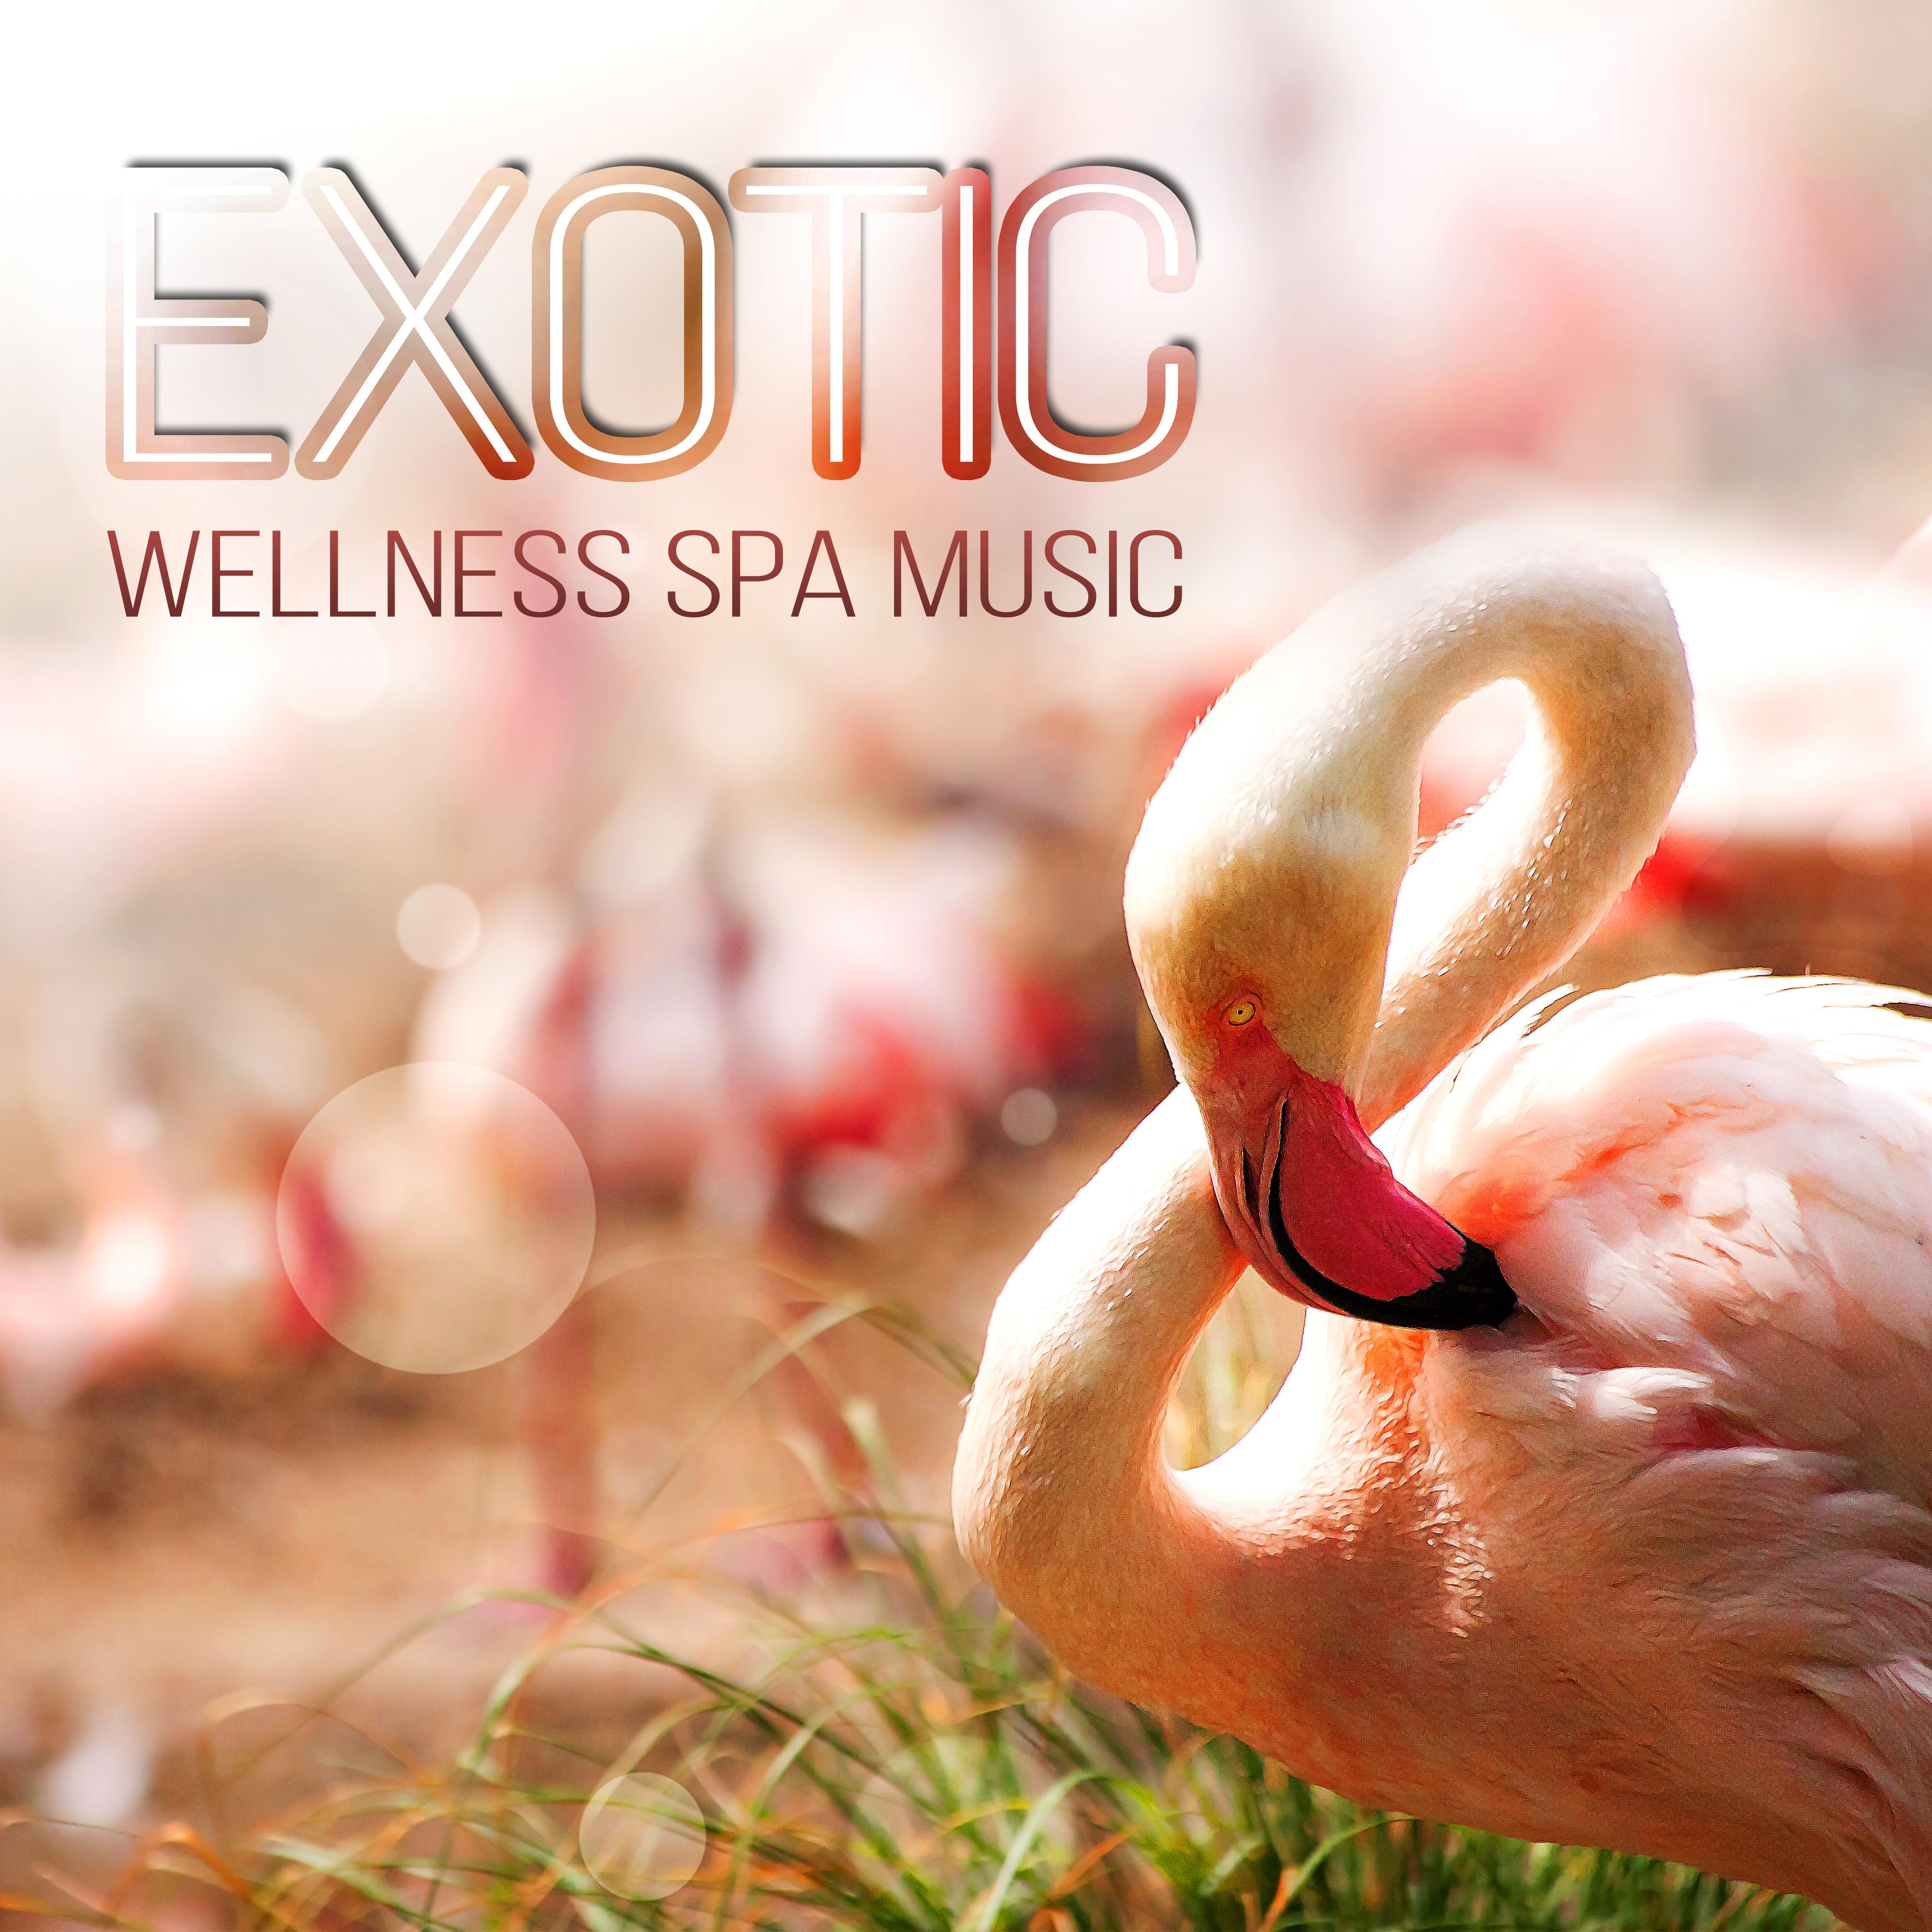 Exotic Wellness Spa Music  New Age Songs for Spa Breaks, Relaxation  Meditation, Sound Therapy, Massage, Reiki, Stress Relief  Well Being